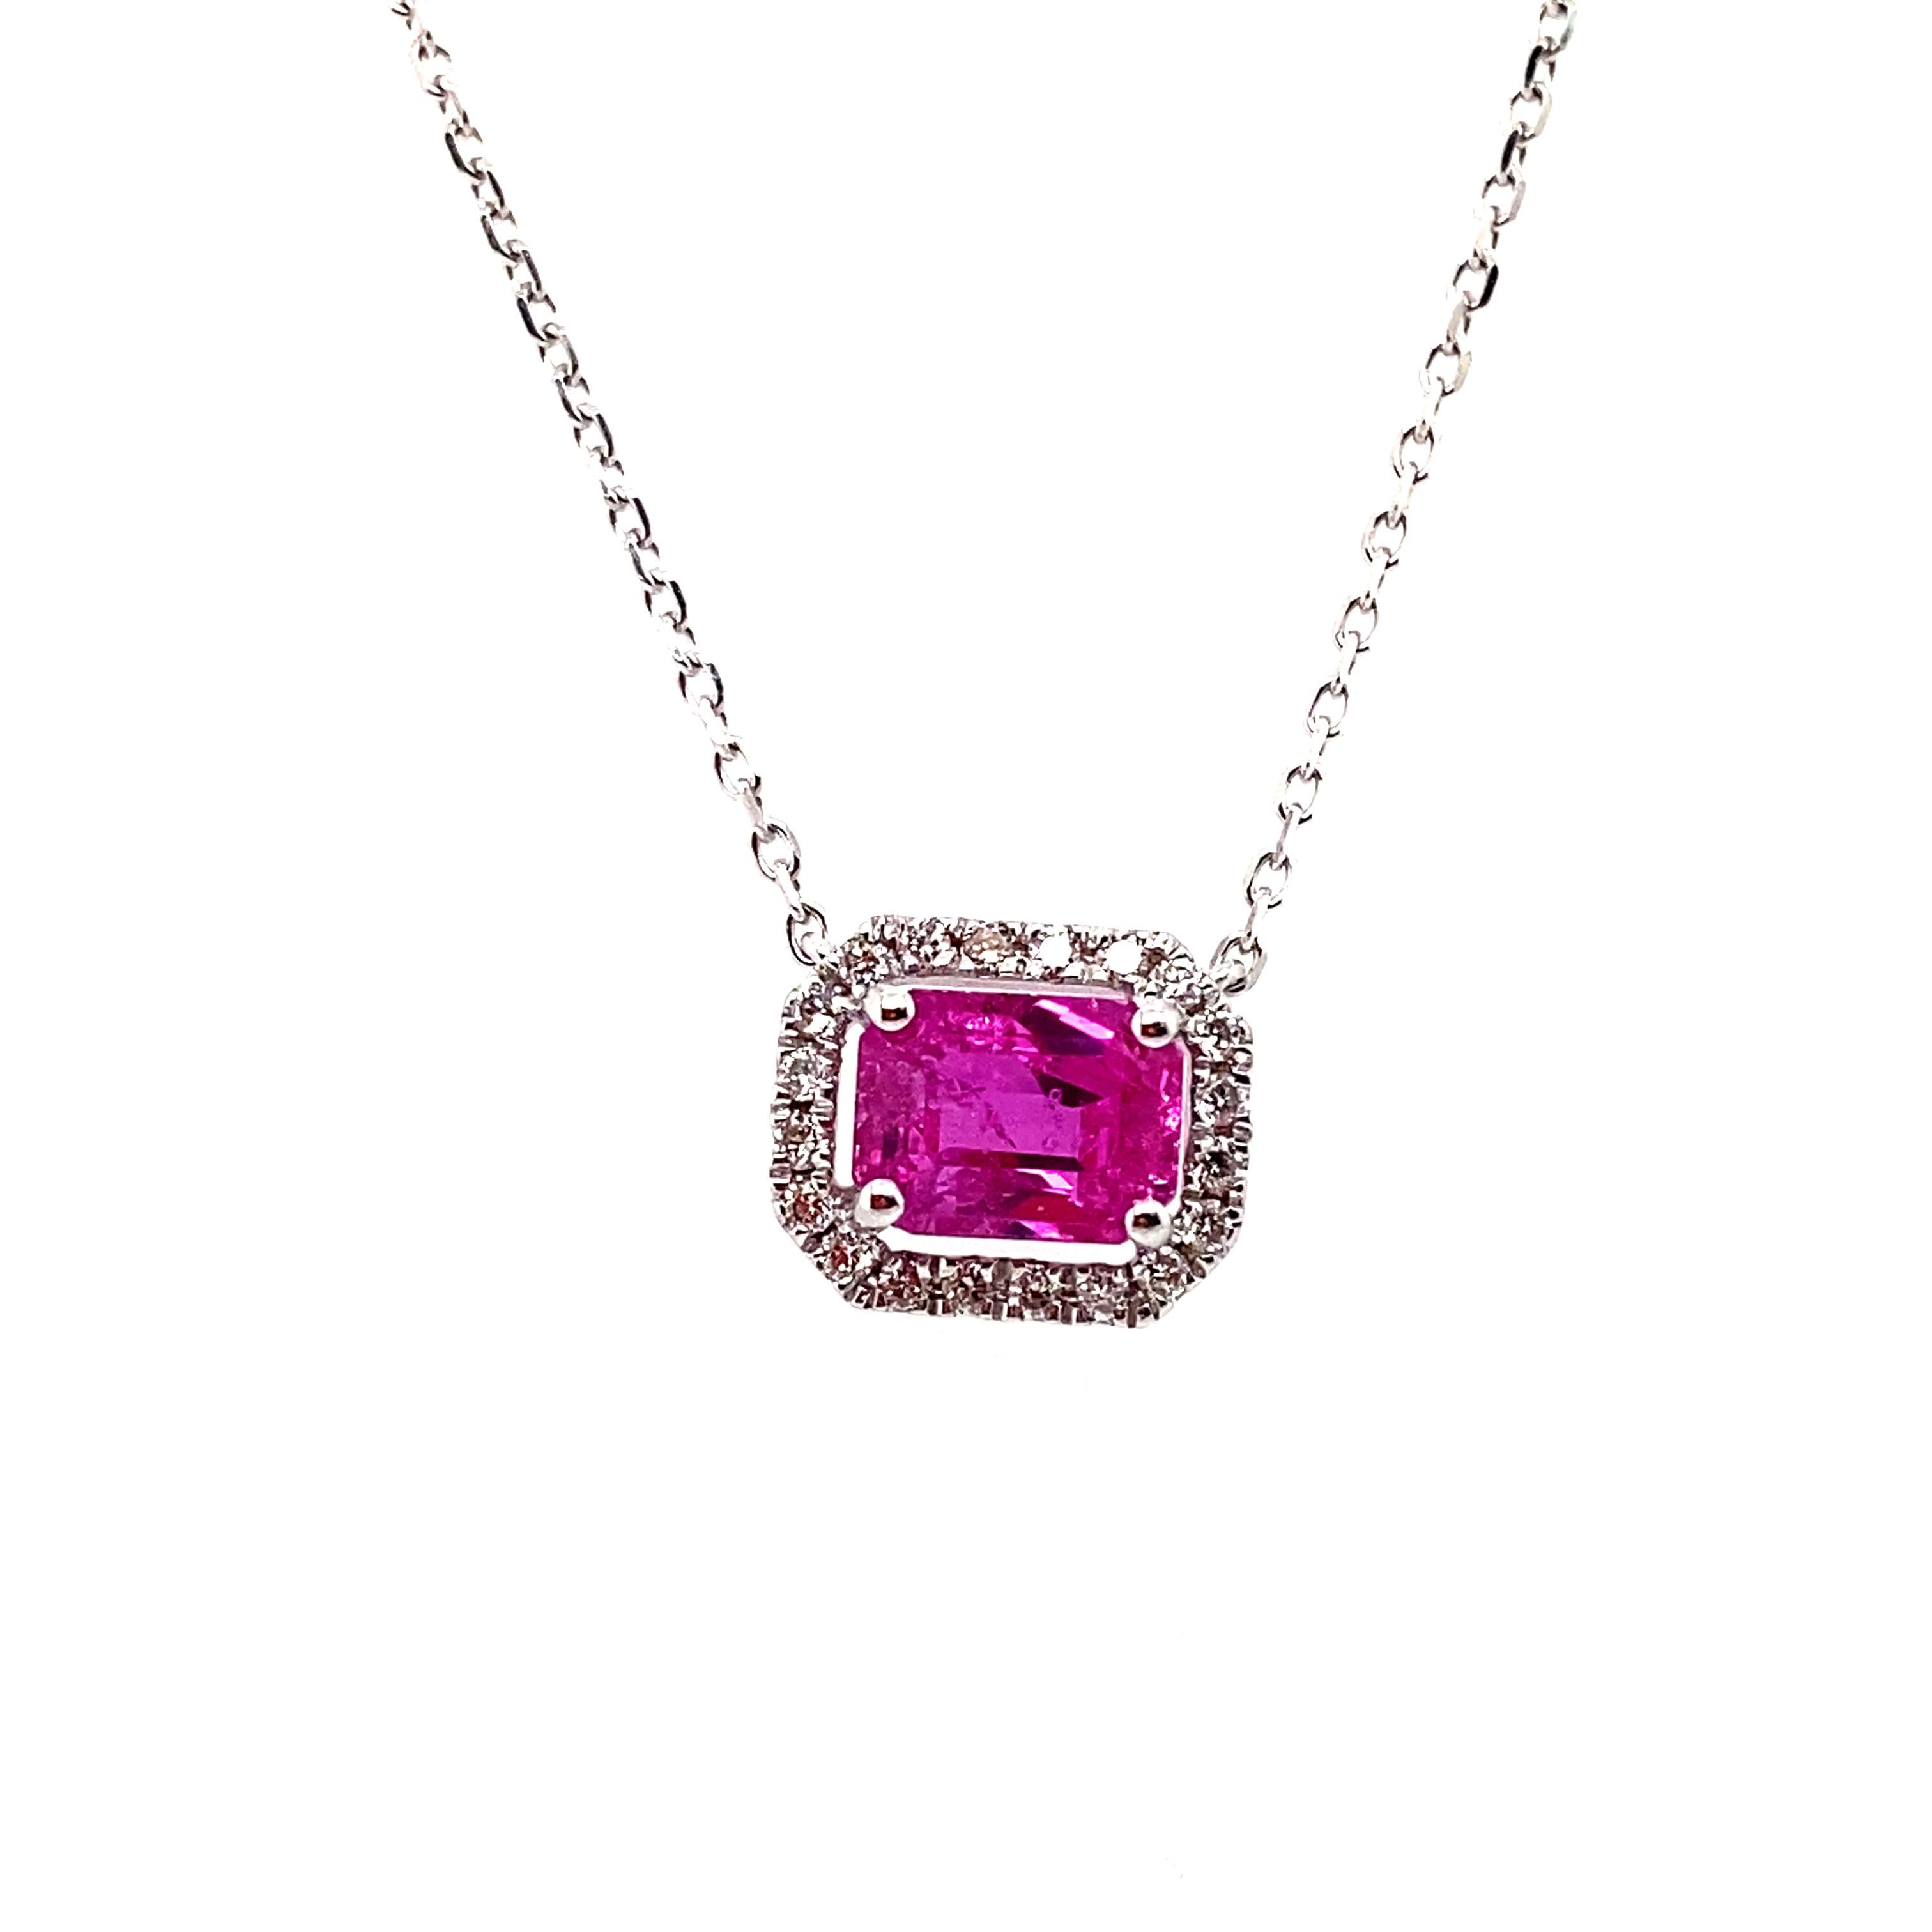 1.22 Carat Octagon-Cut Burma No Heat Ruby and White Diamond Pendant Necklace:

A beautiful pendant necklace, it features a 1.22 carat emerald-cut unheated Burmese ruby in the centre surrounded by a halo of white round-brilliant cut diamonds weighing